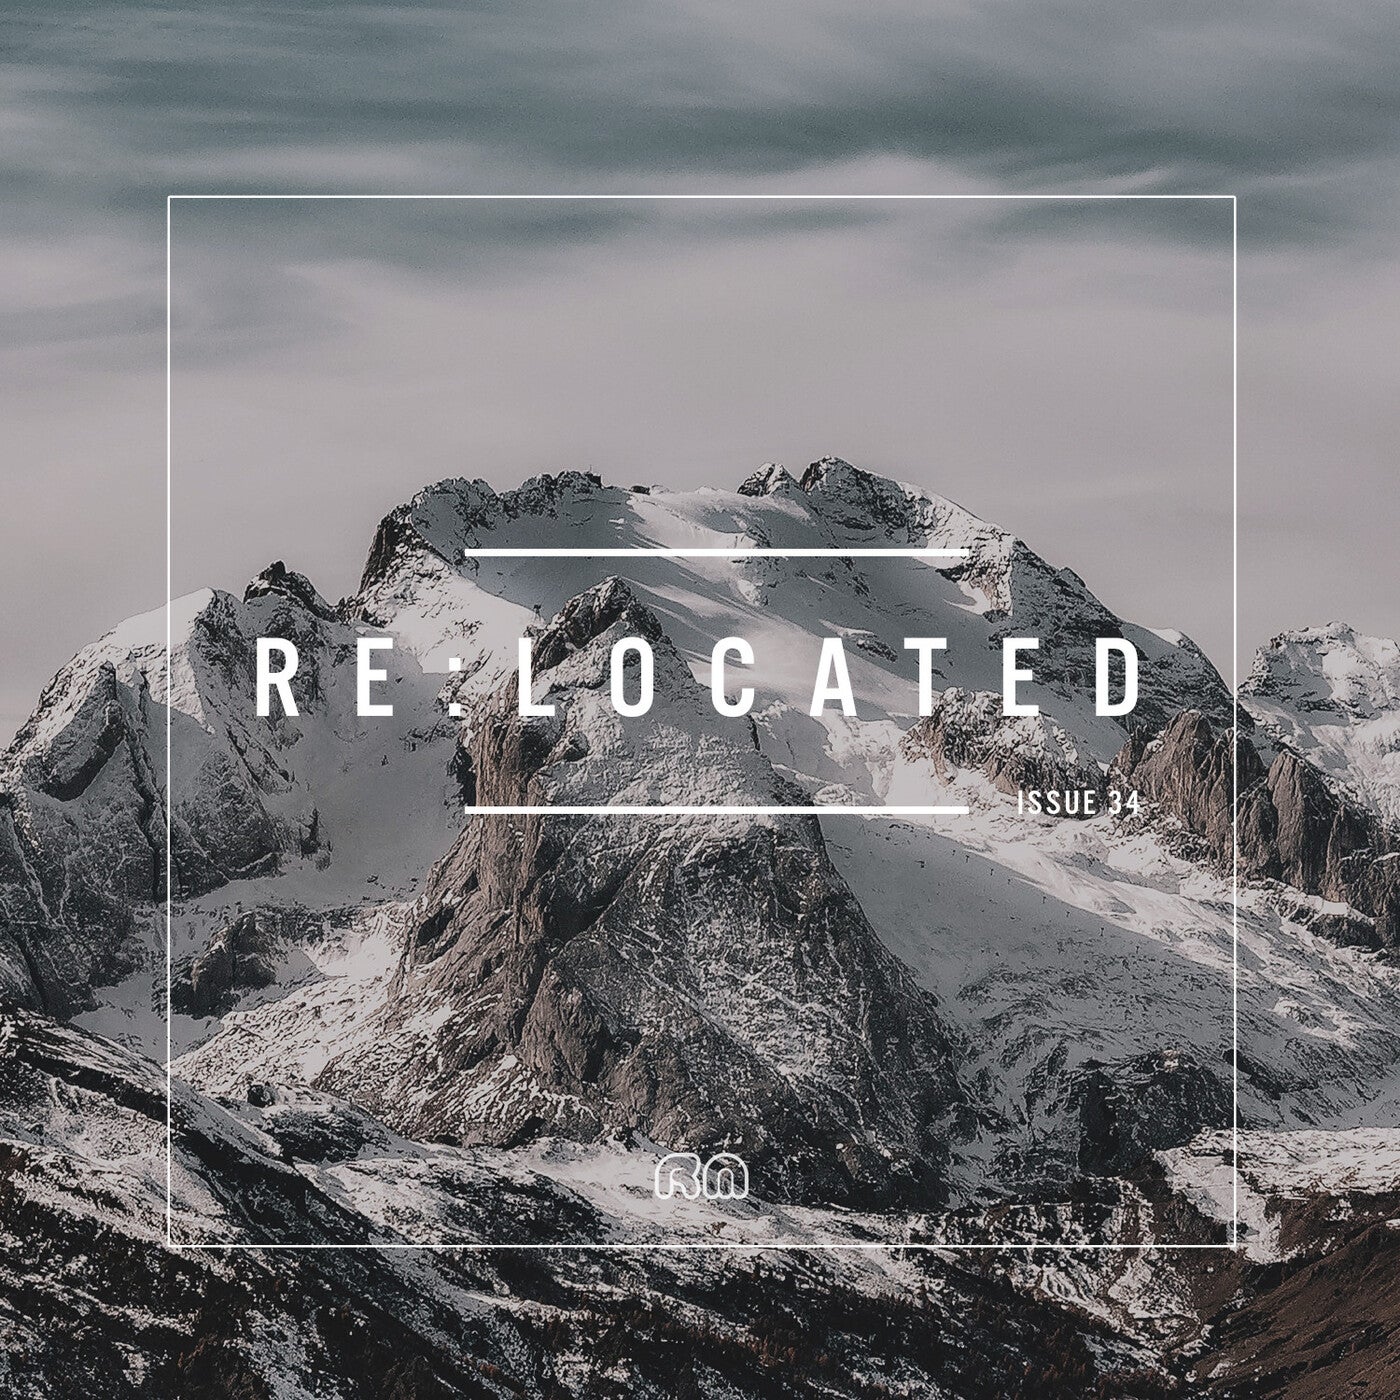 Re:Located, Issue 34